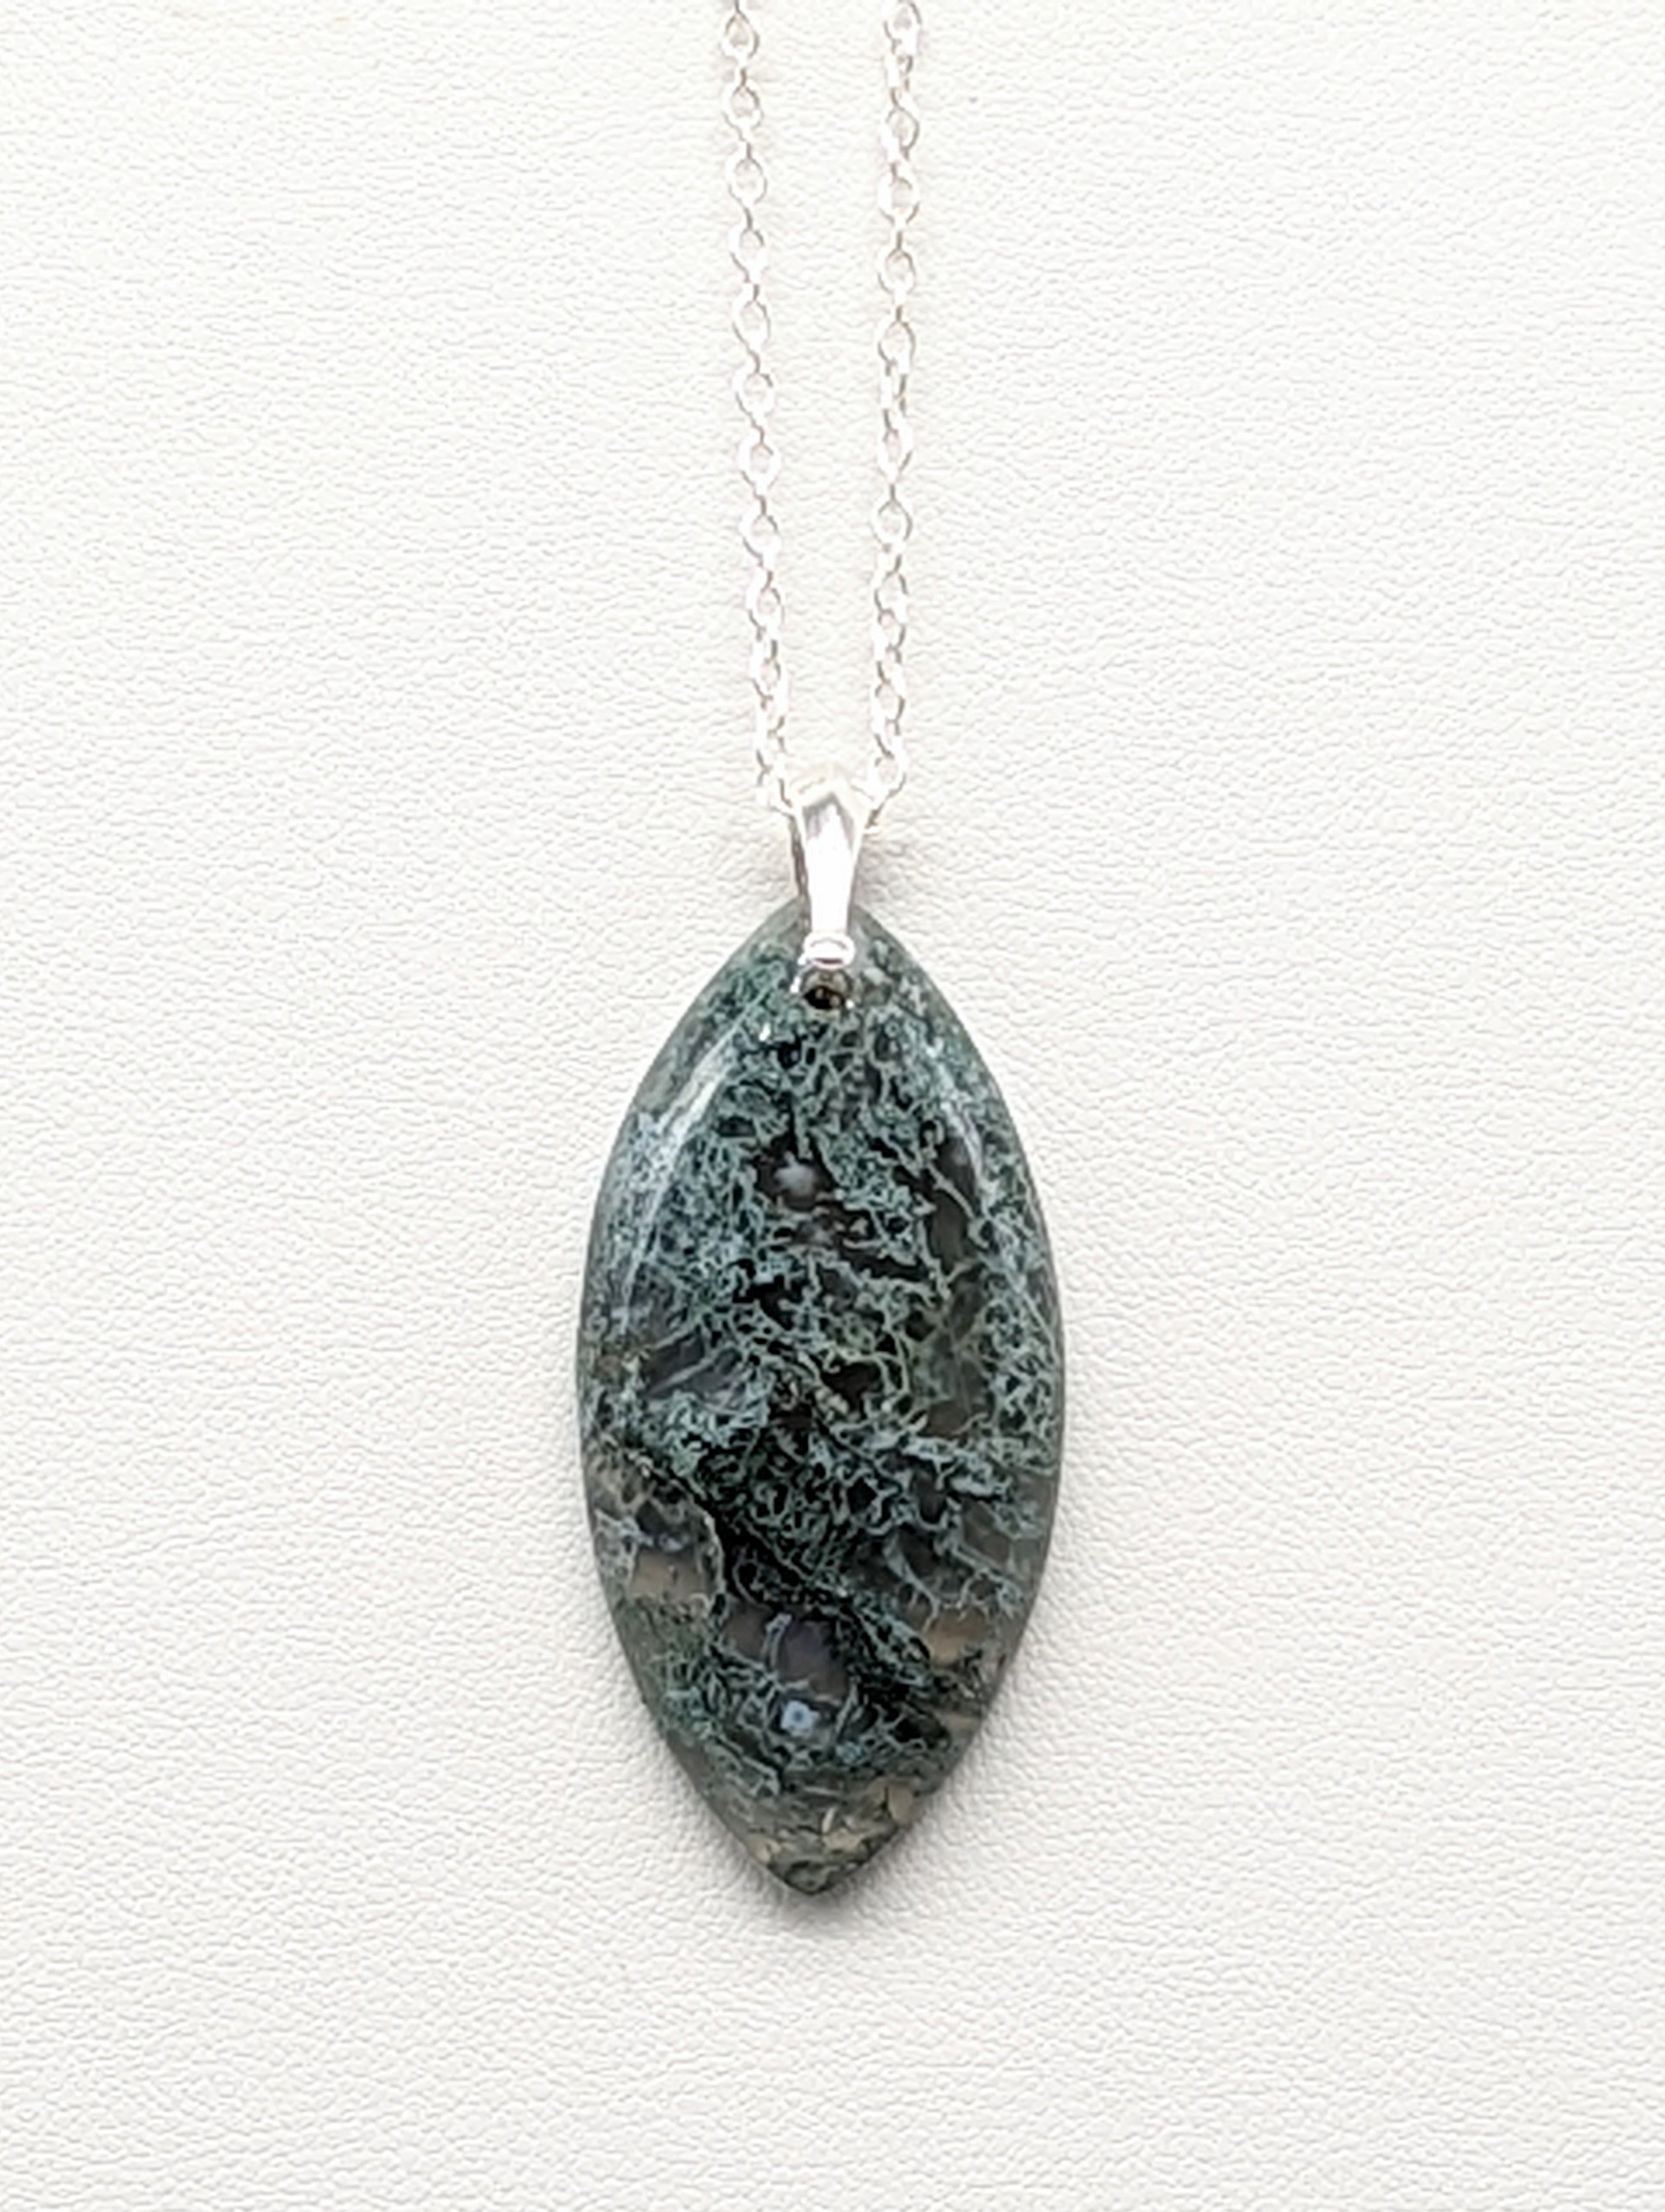 Moss Agate Necklace on Sterling Silver Bail and Chain